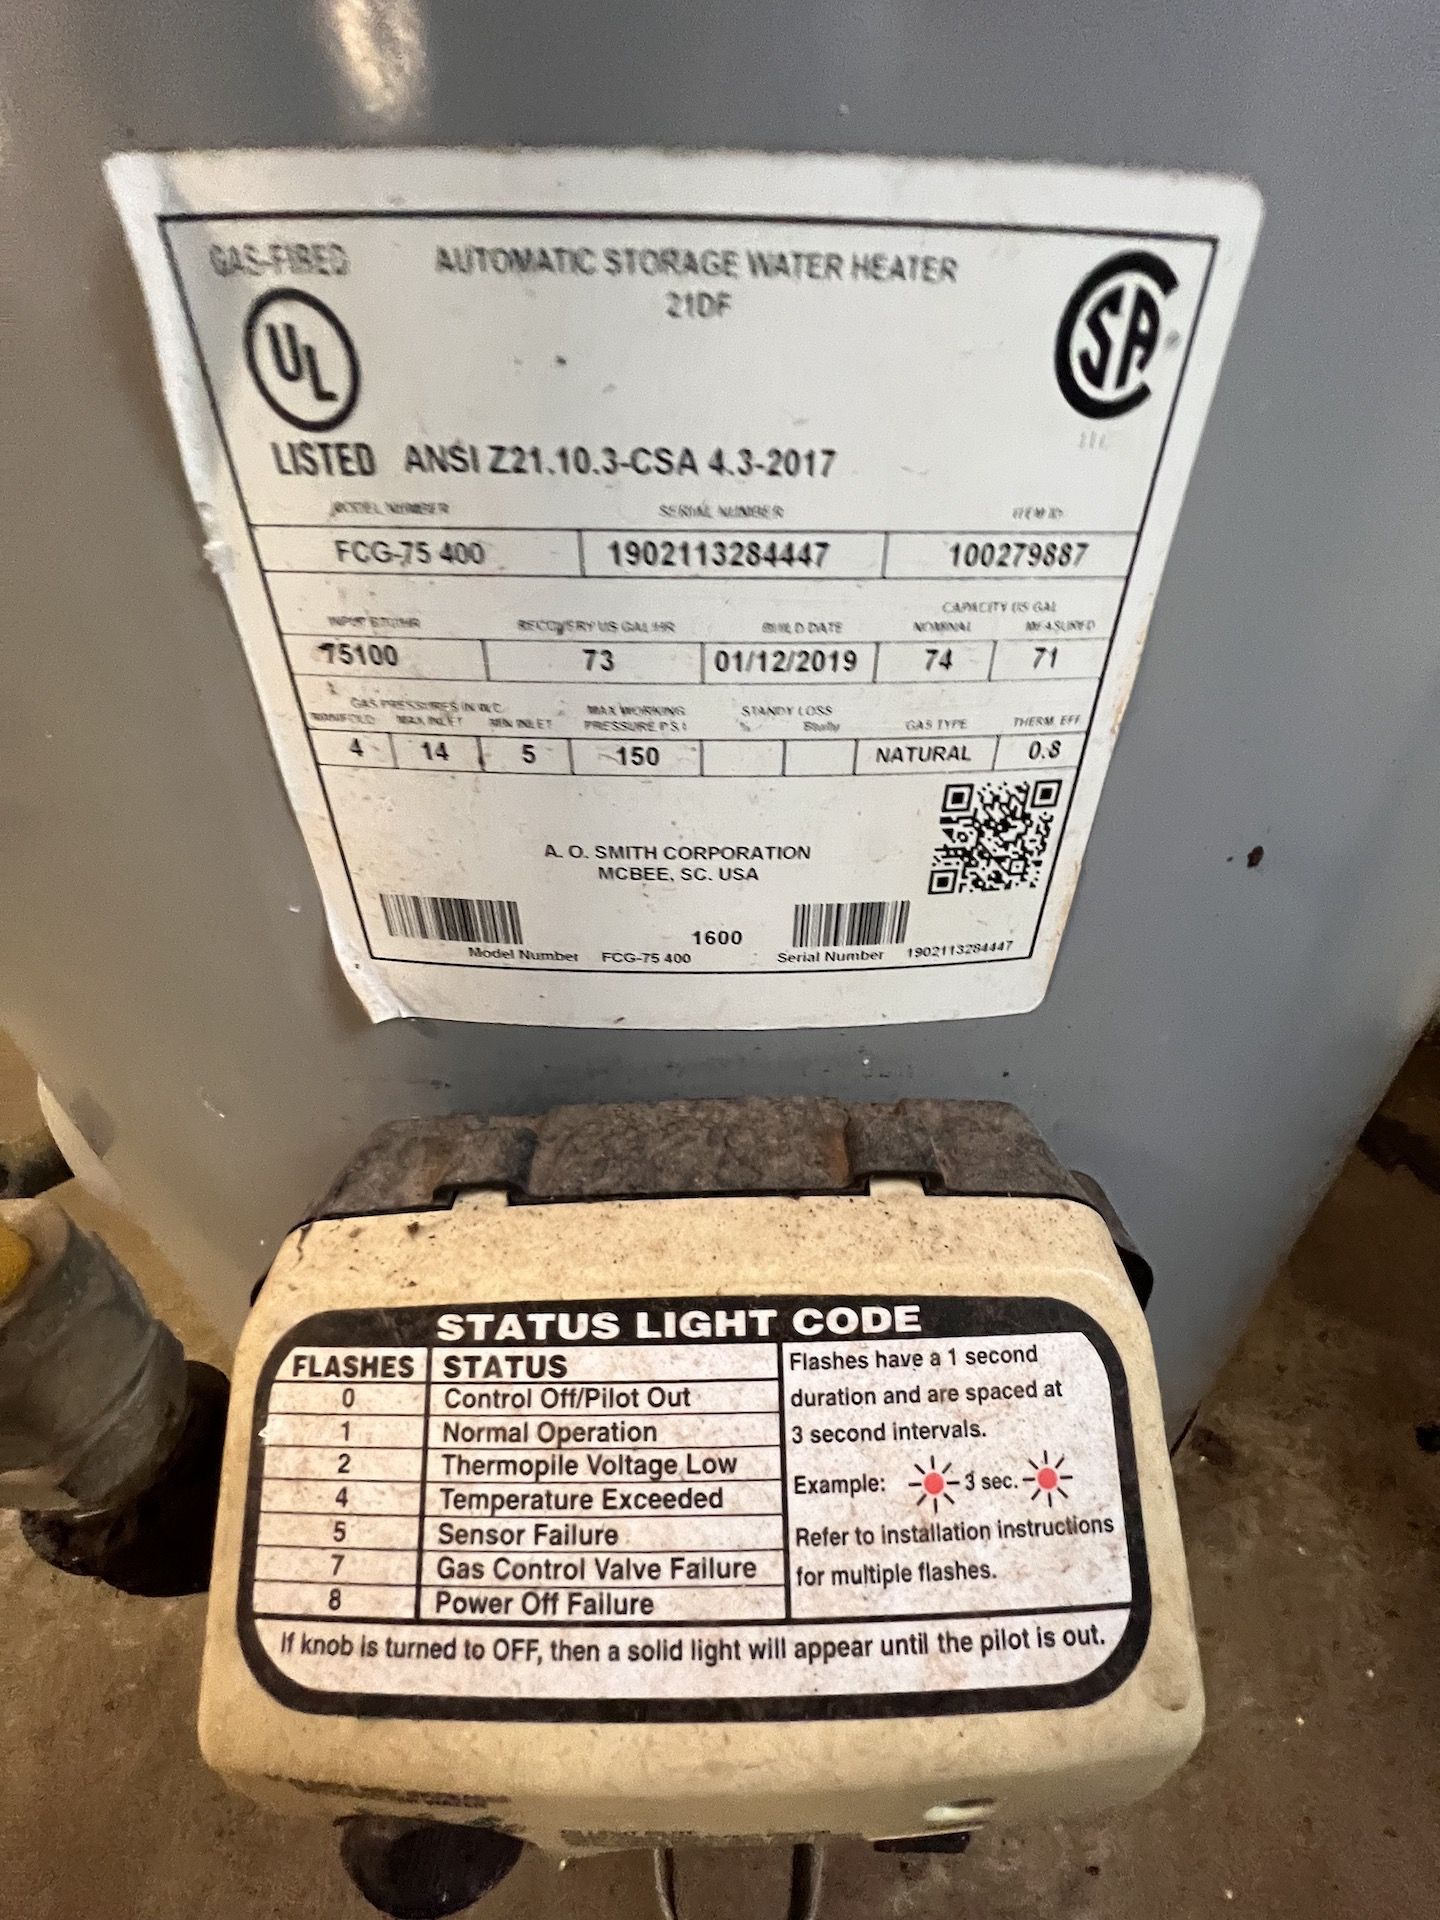 2019 AC SMITH NATURAL GAS WATER HEATER, MODEL FCG-75 400, S/N 100279887 - Image 3 of 3